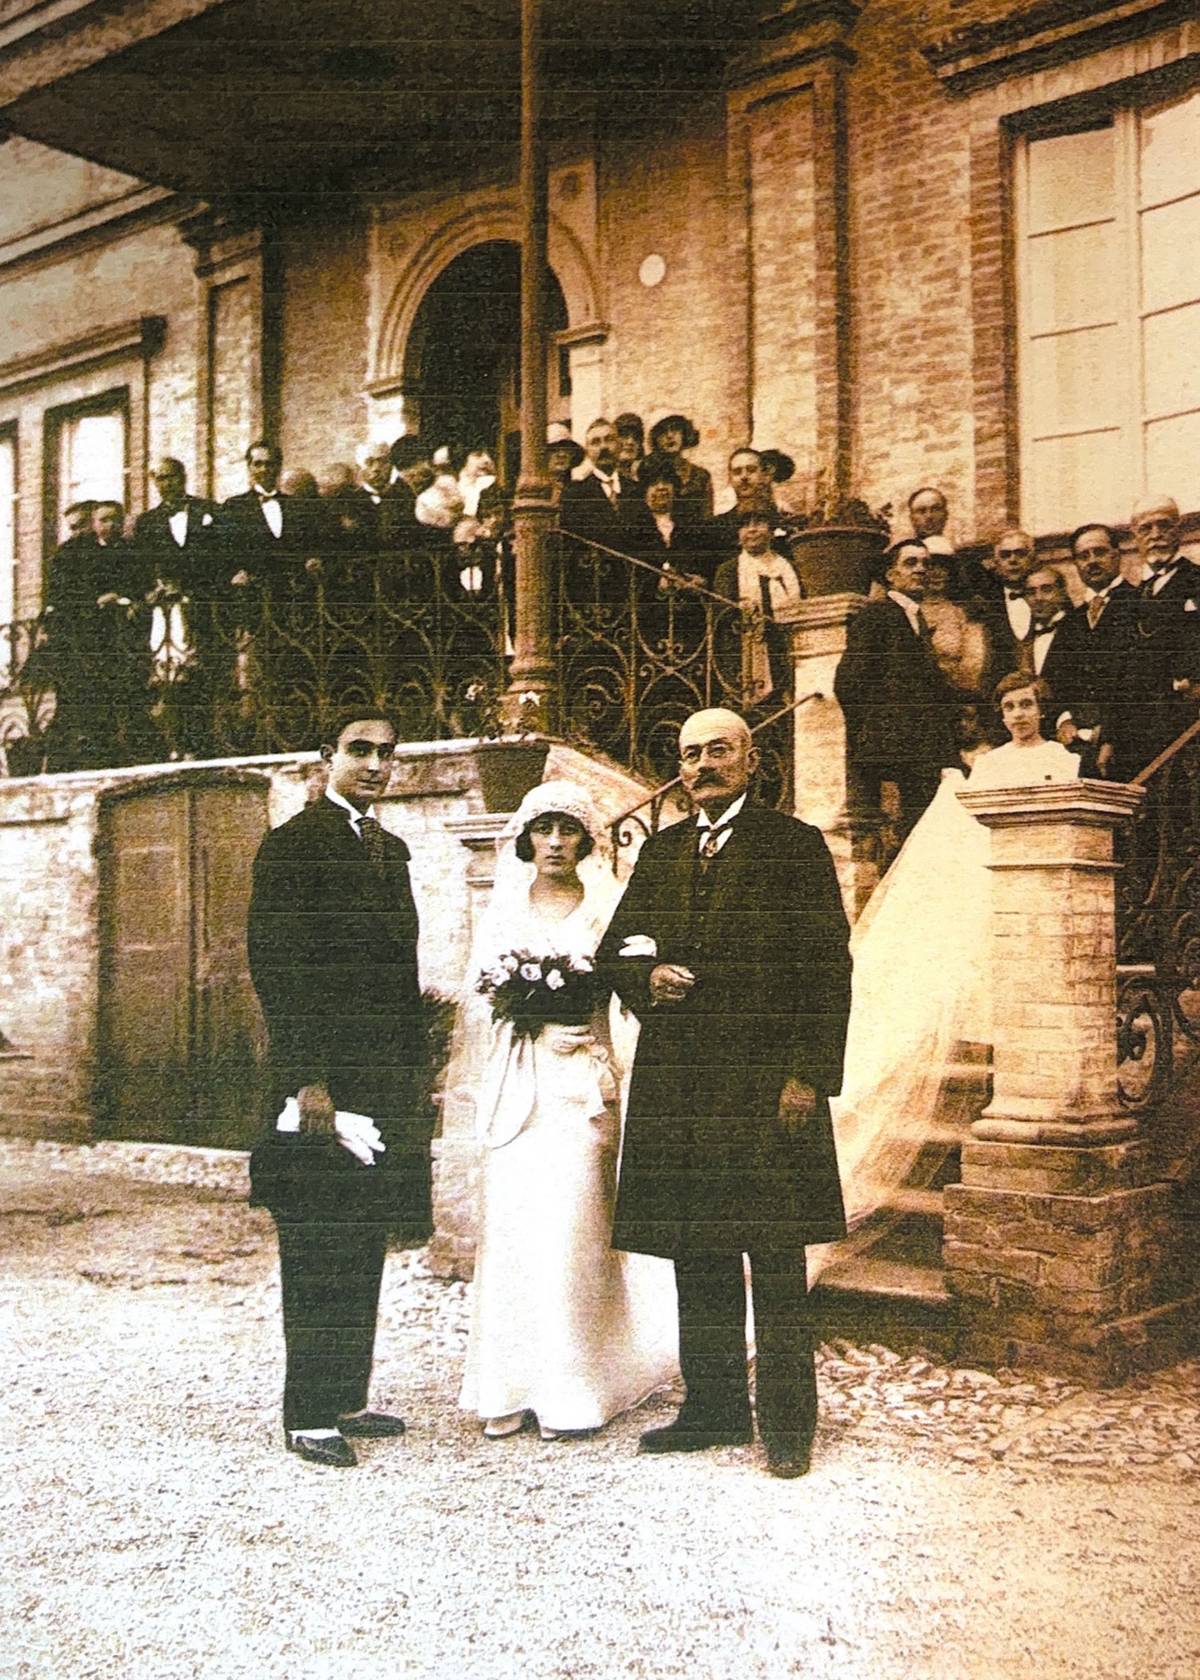 Francesco Tonelli (right) with his daughter Maria and her husband Gaetano D’Arostotile in front of Villa Tonelli on their wedding day, September 9, 1929